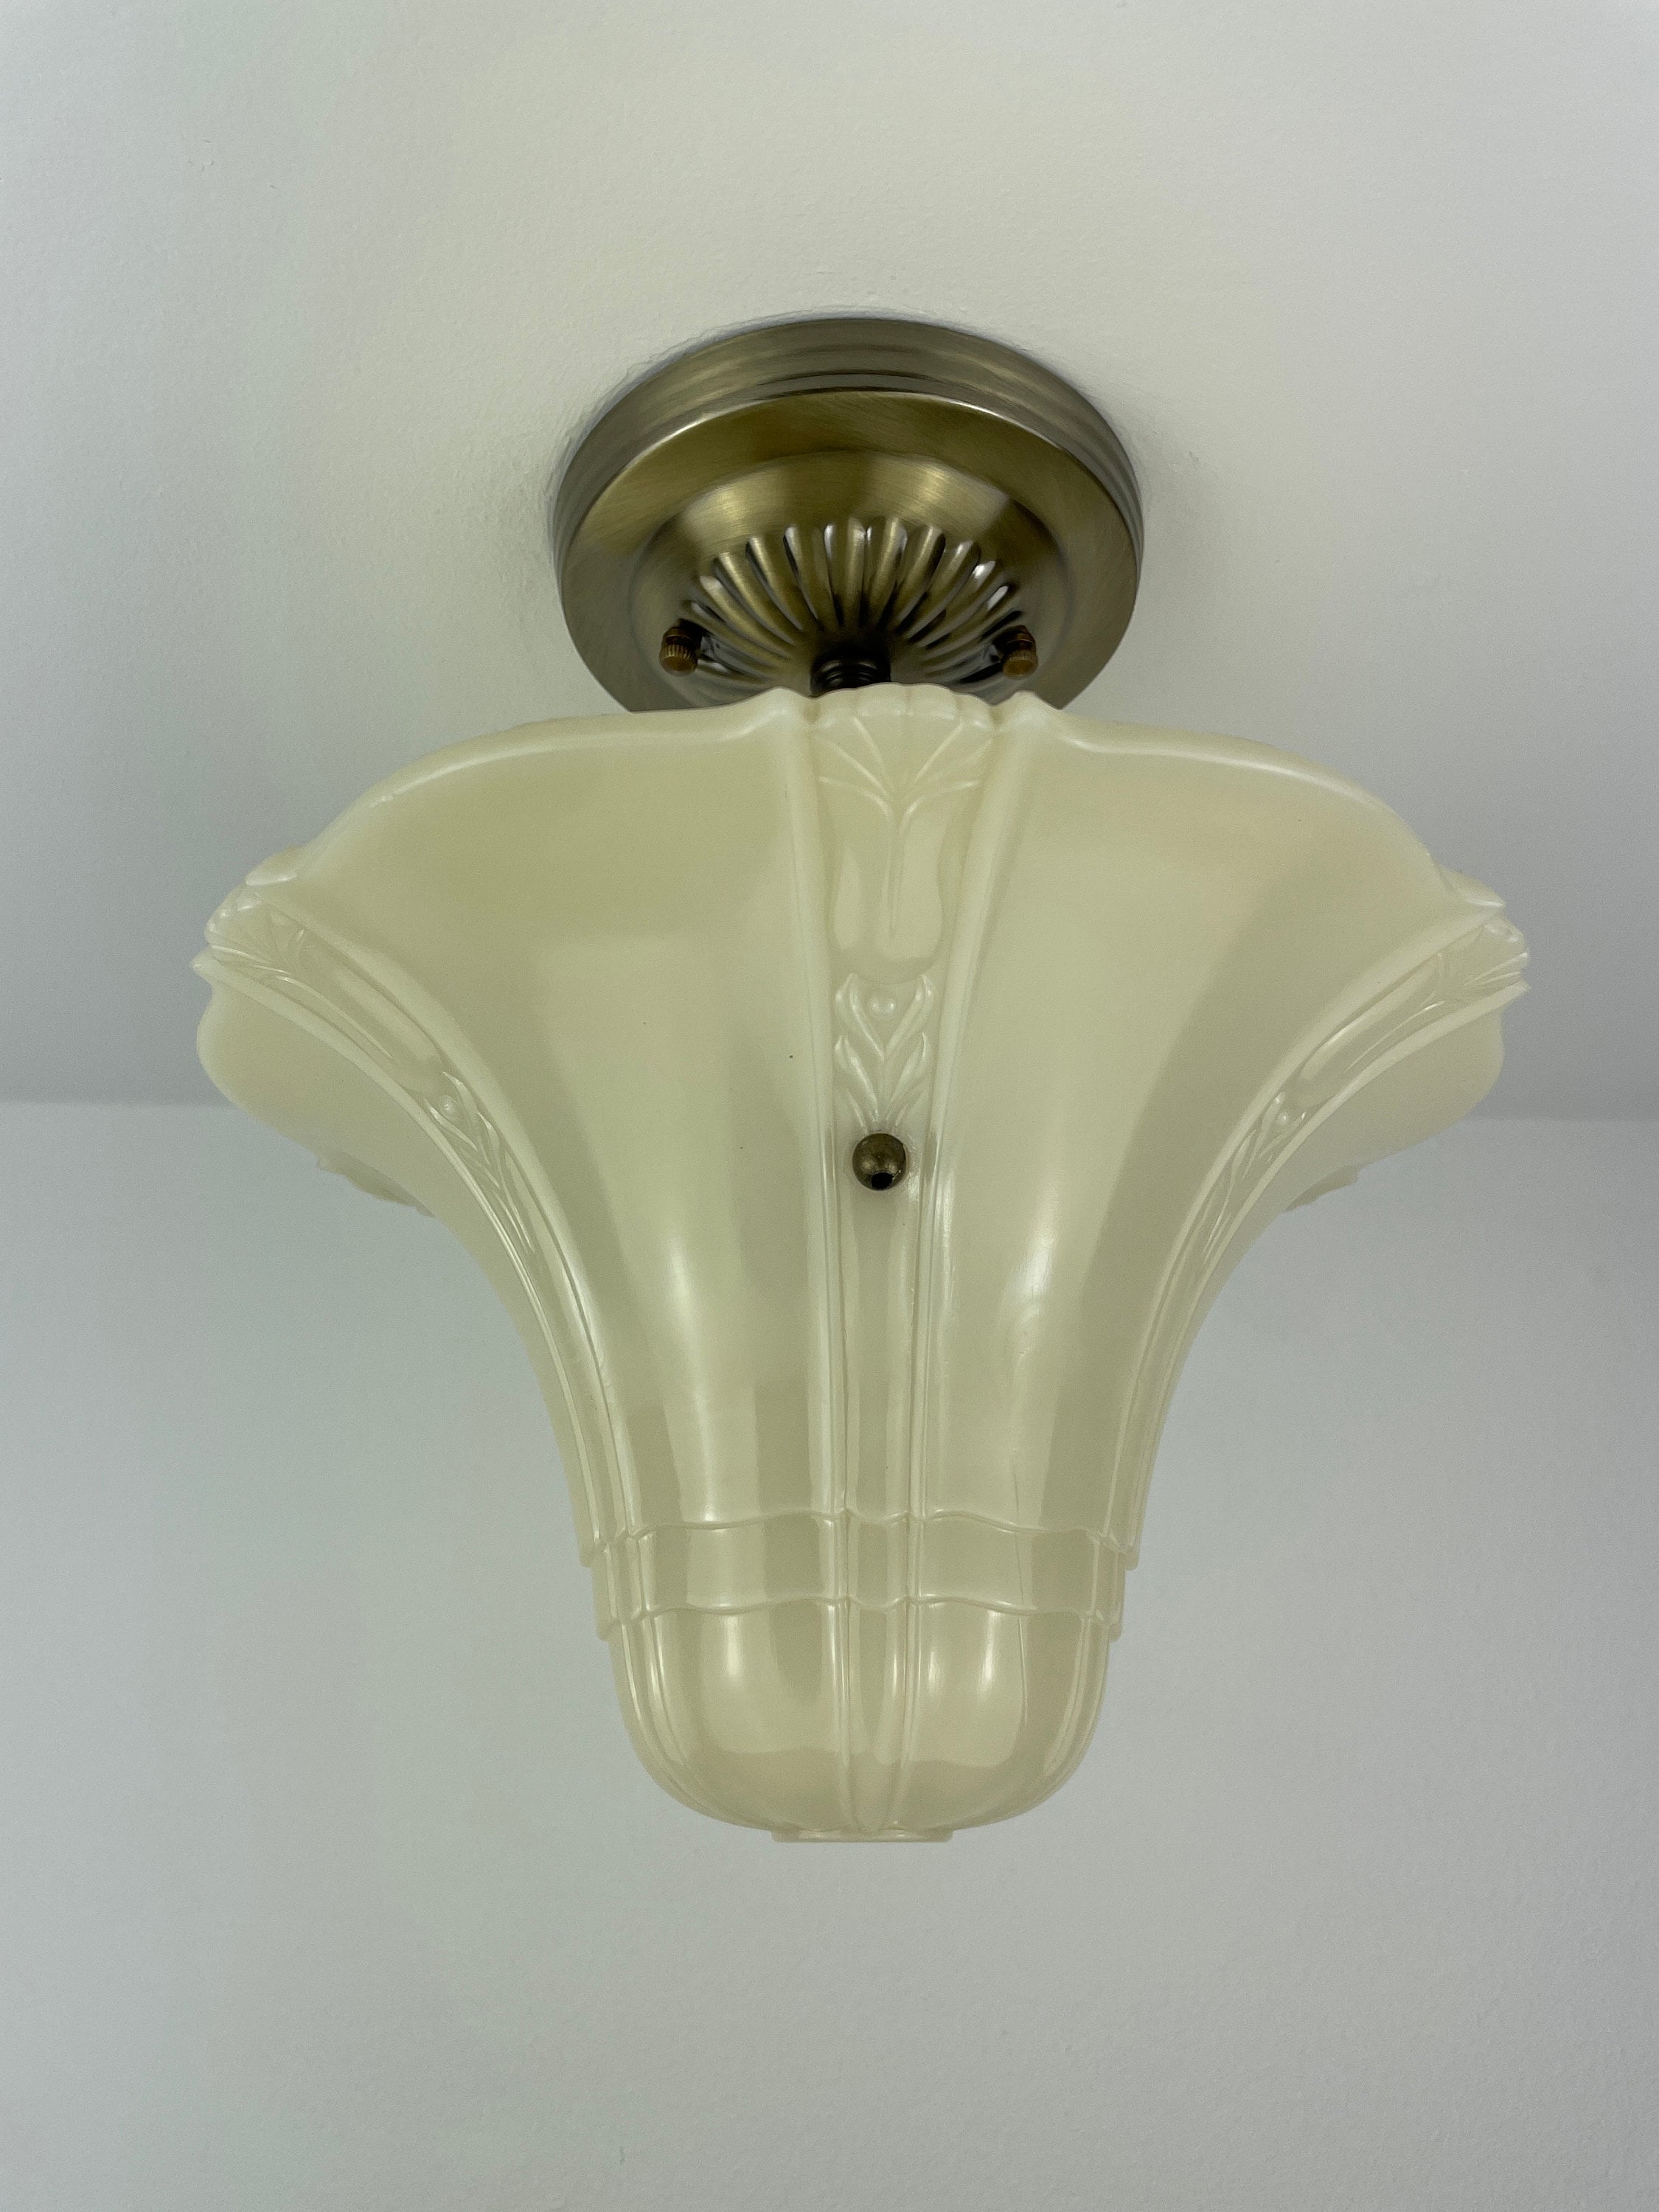 1940's 3 Chain Semiflush Light -  with decorative Custard Glass shade with new antique brass 3 chain hardware